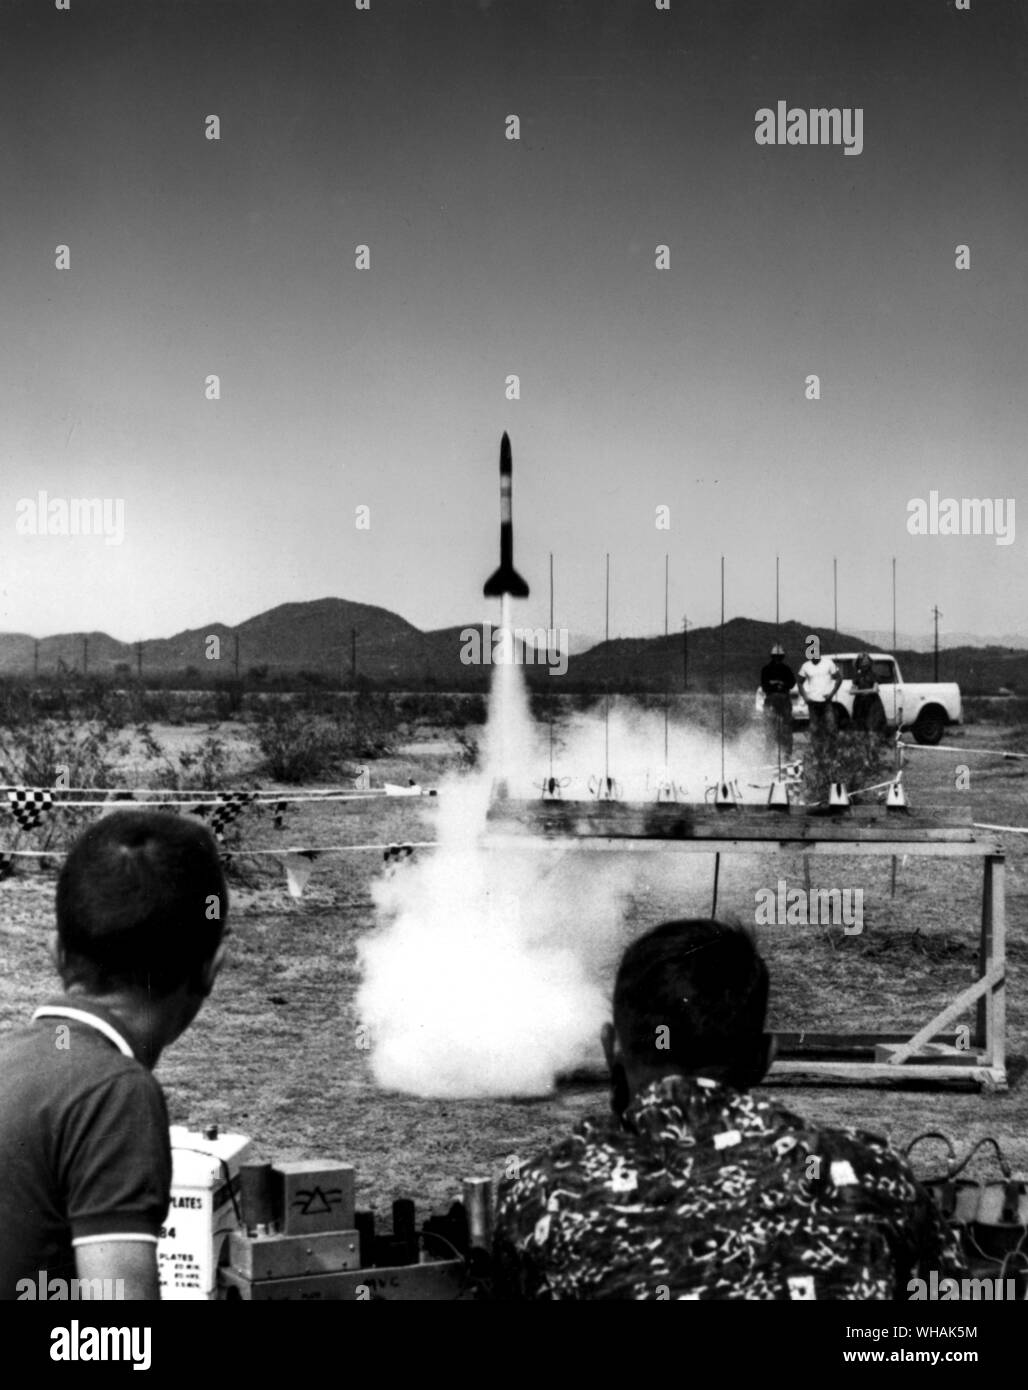 Safety First, observers keep a safe distance as a model rocket soars skywards Stock Photo